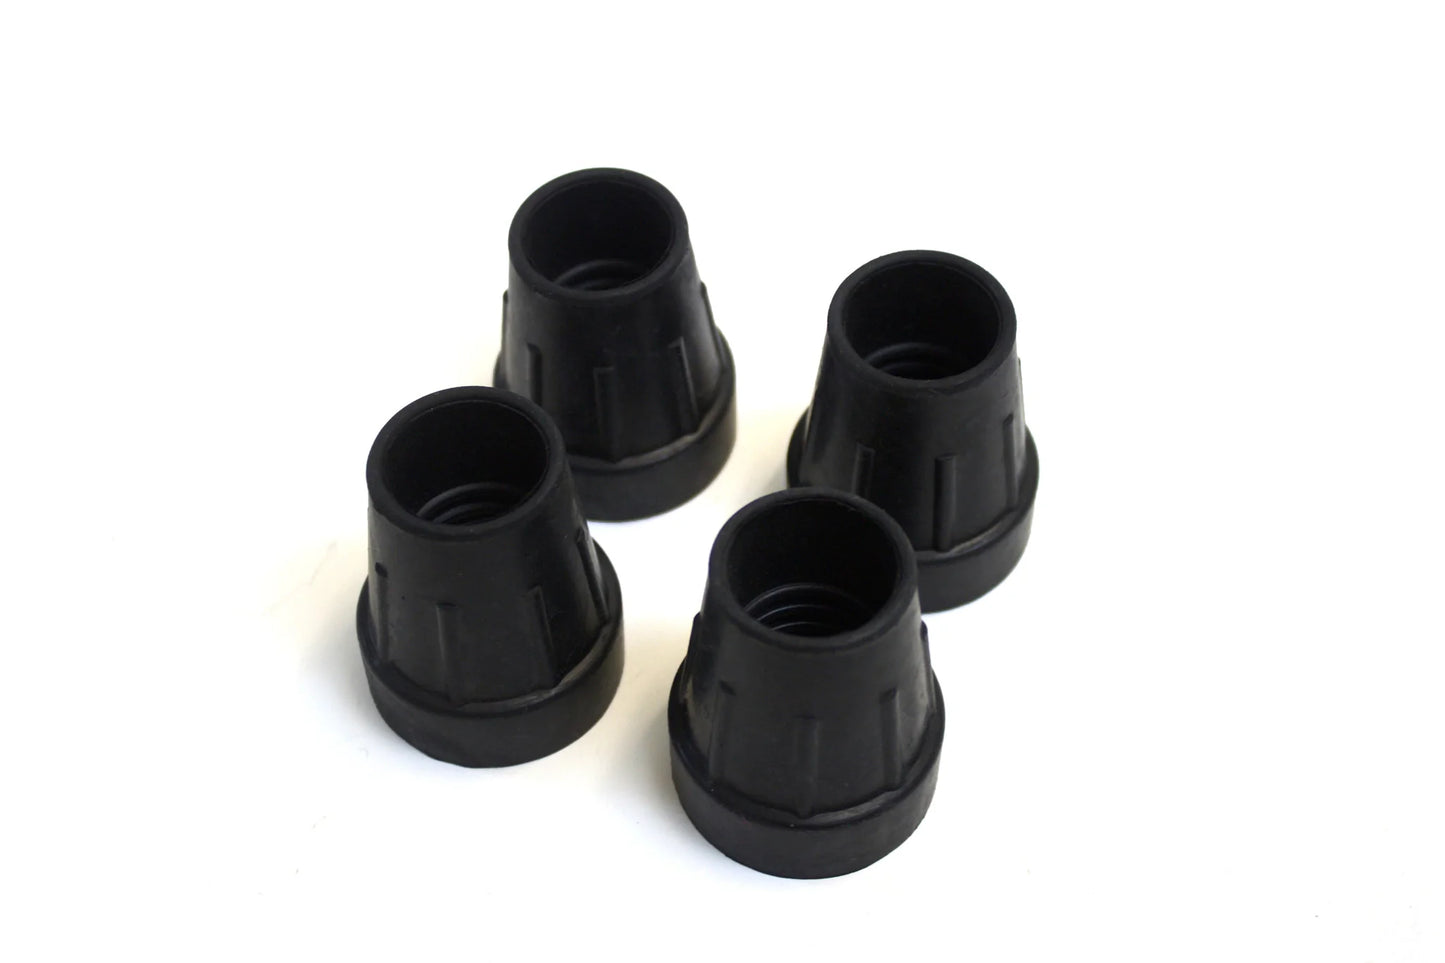 HIK9 Heavy Duty Rubber Feet for Raised Beds Protects your Floors